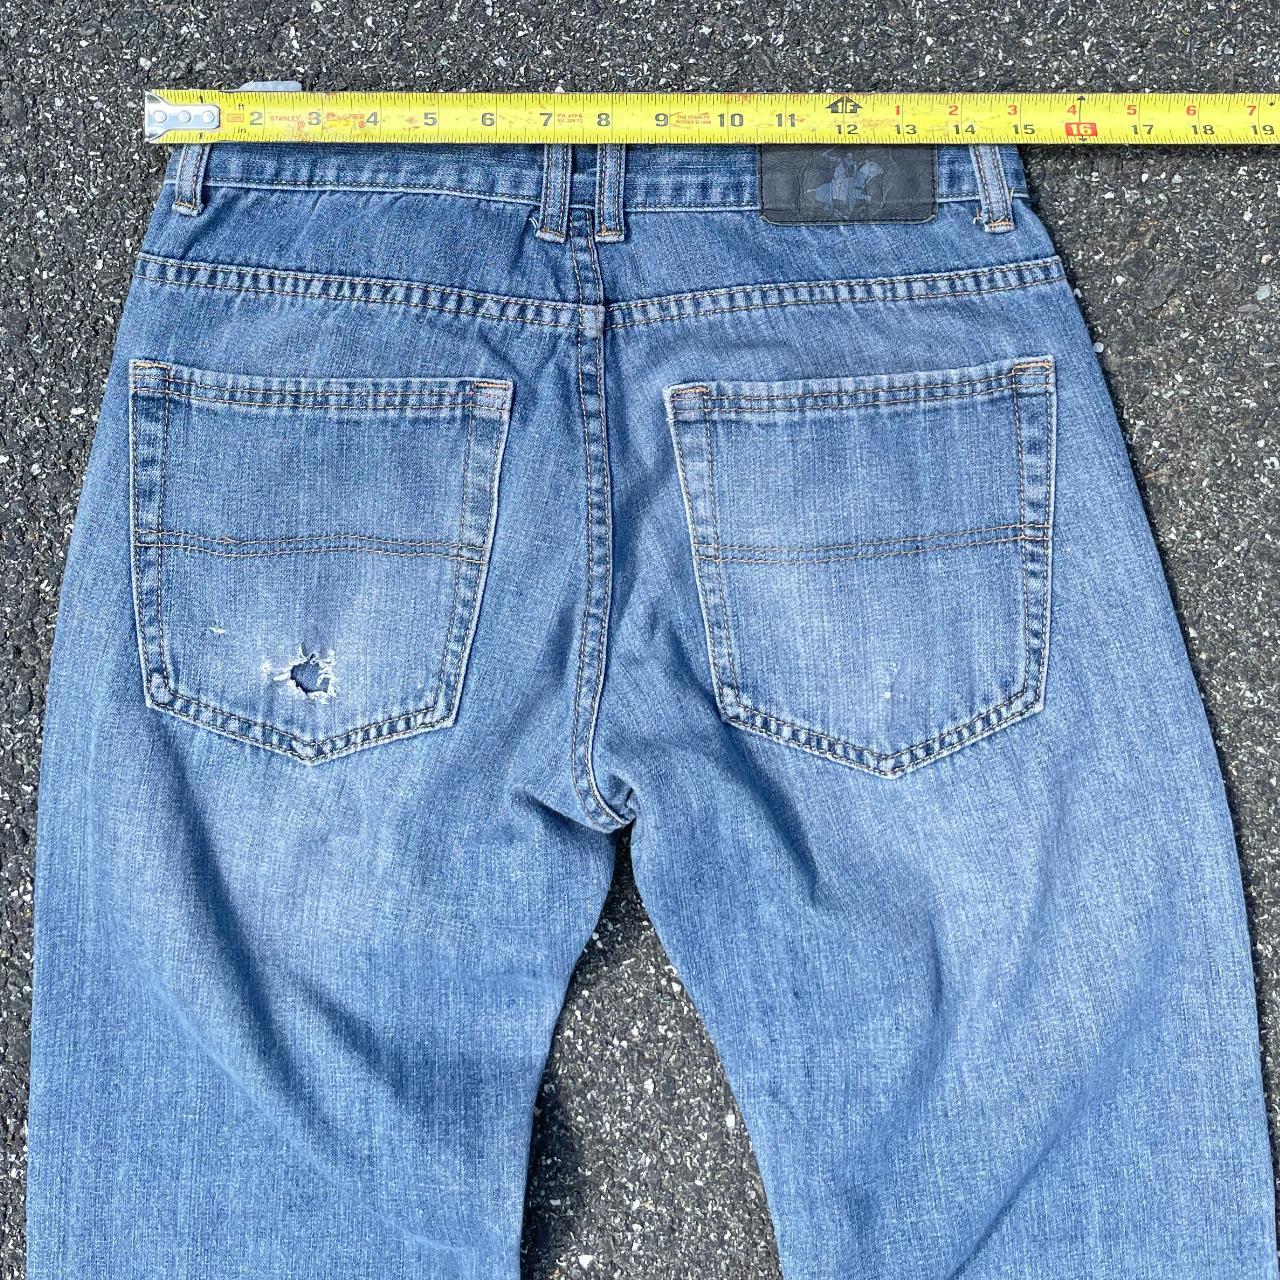 Beverly Hills Polo Club Men's Blue Jeans (7)